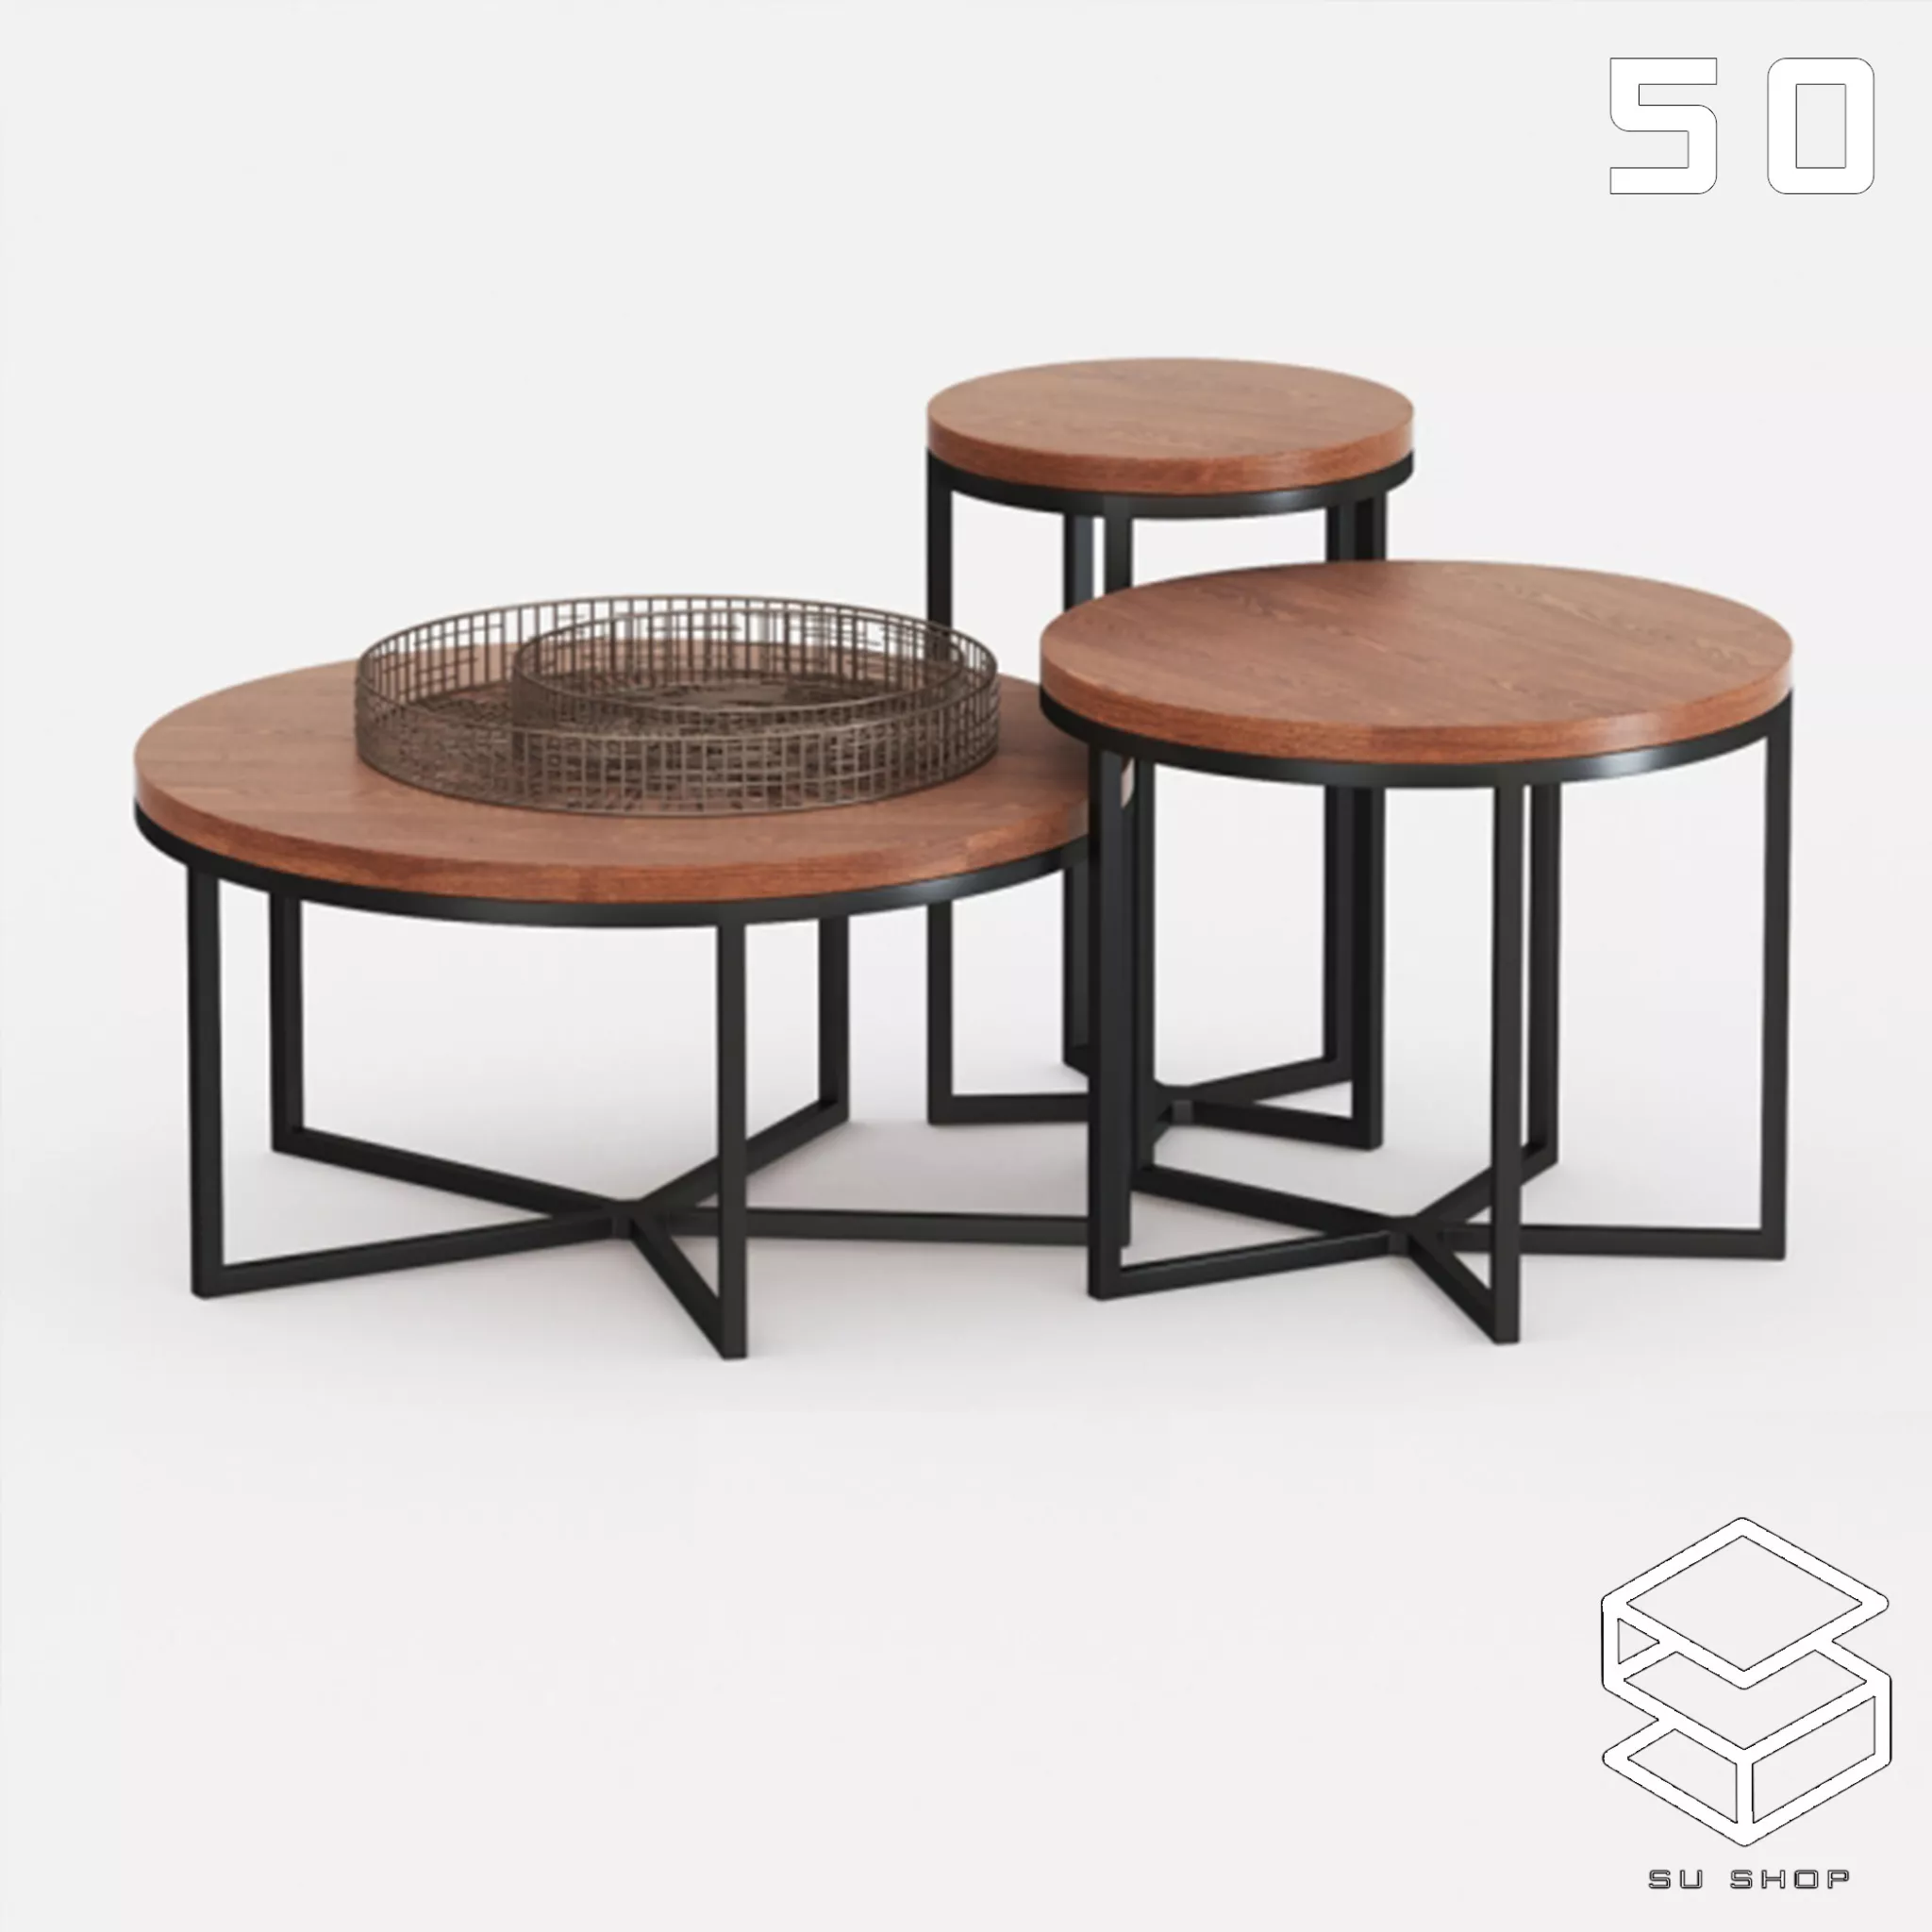 MODERN TEA TABLE - SKETCHUP 3D MODEL - VRAY OR ENSCAPE - ID15061